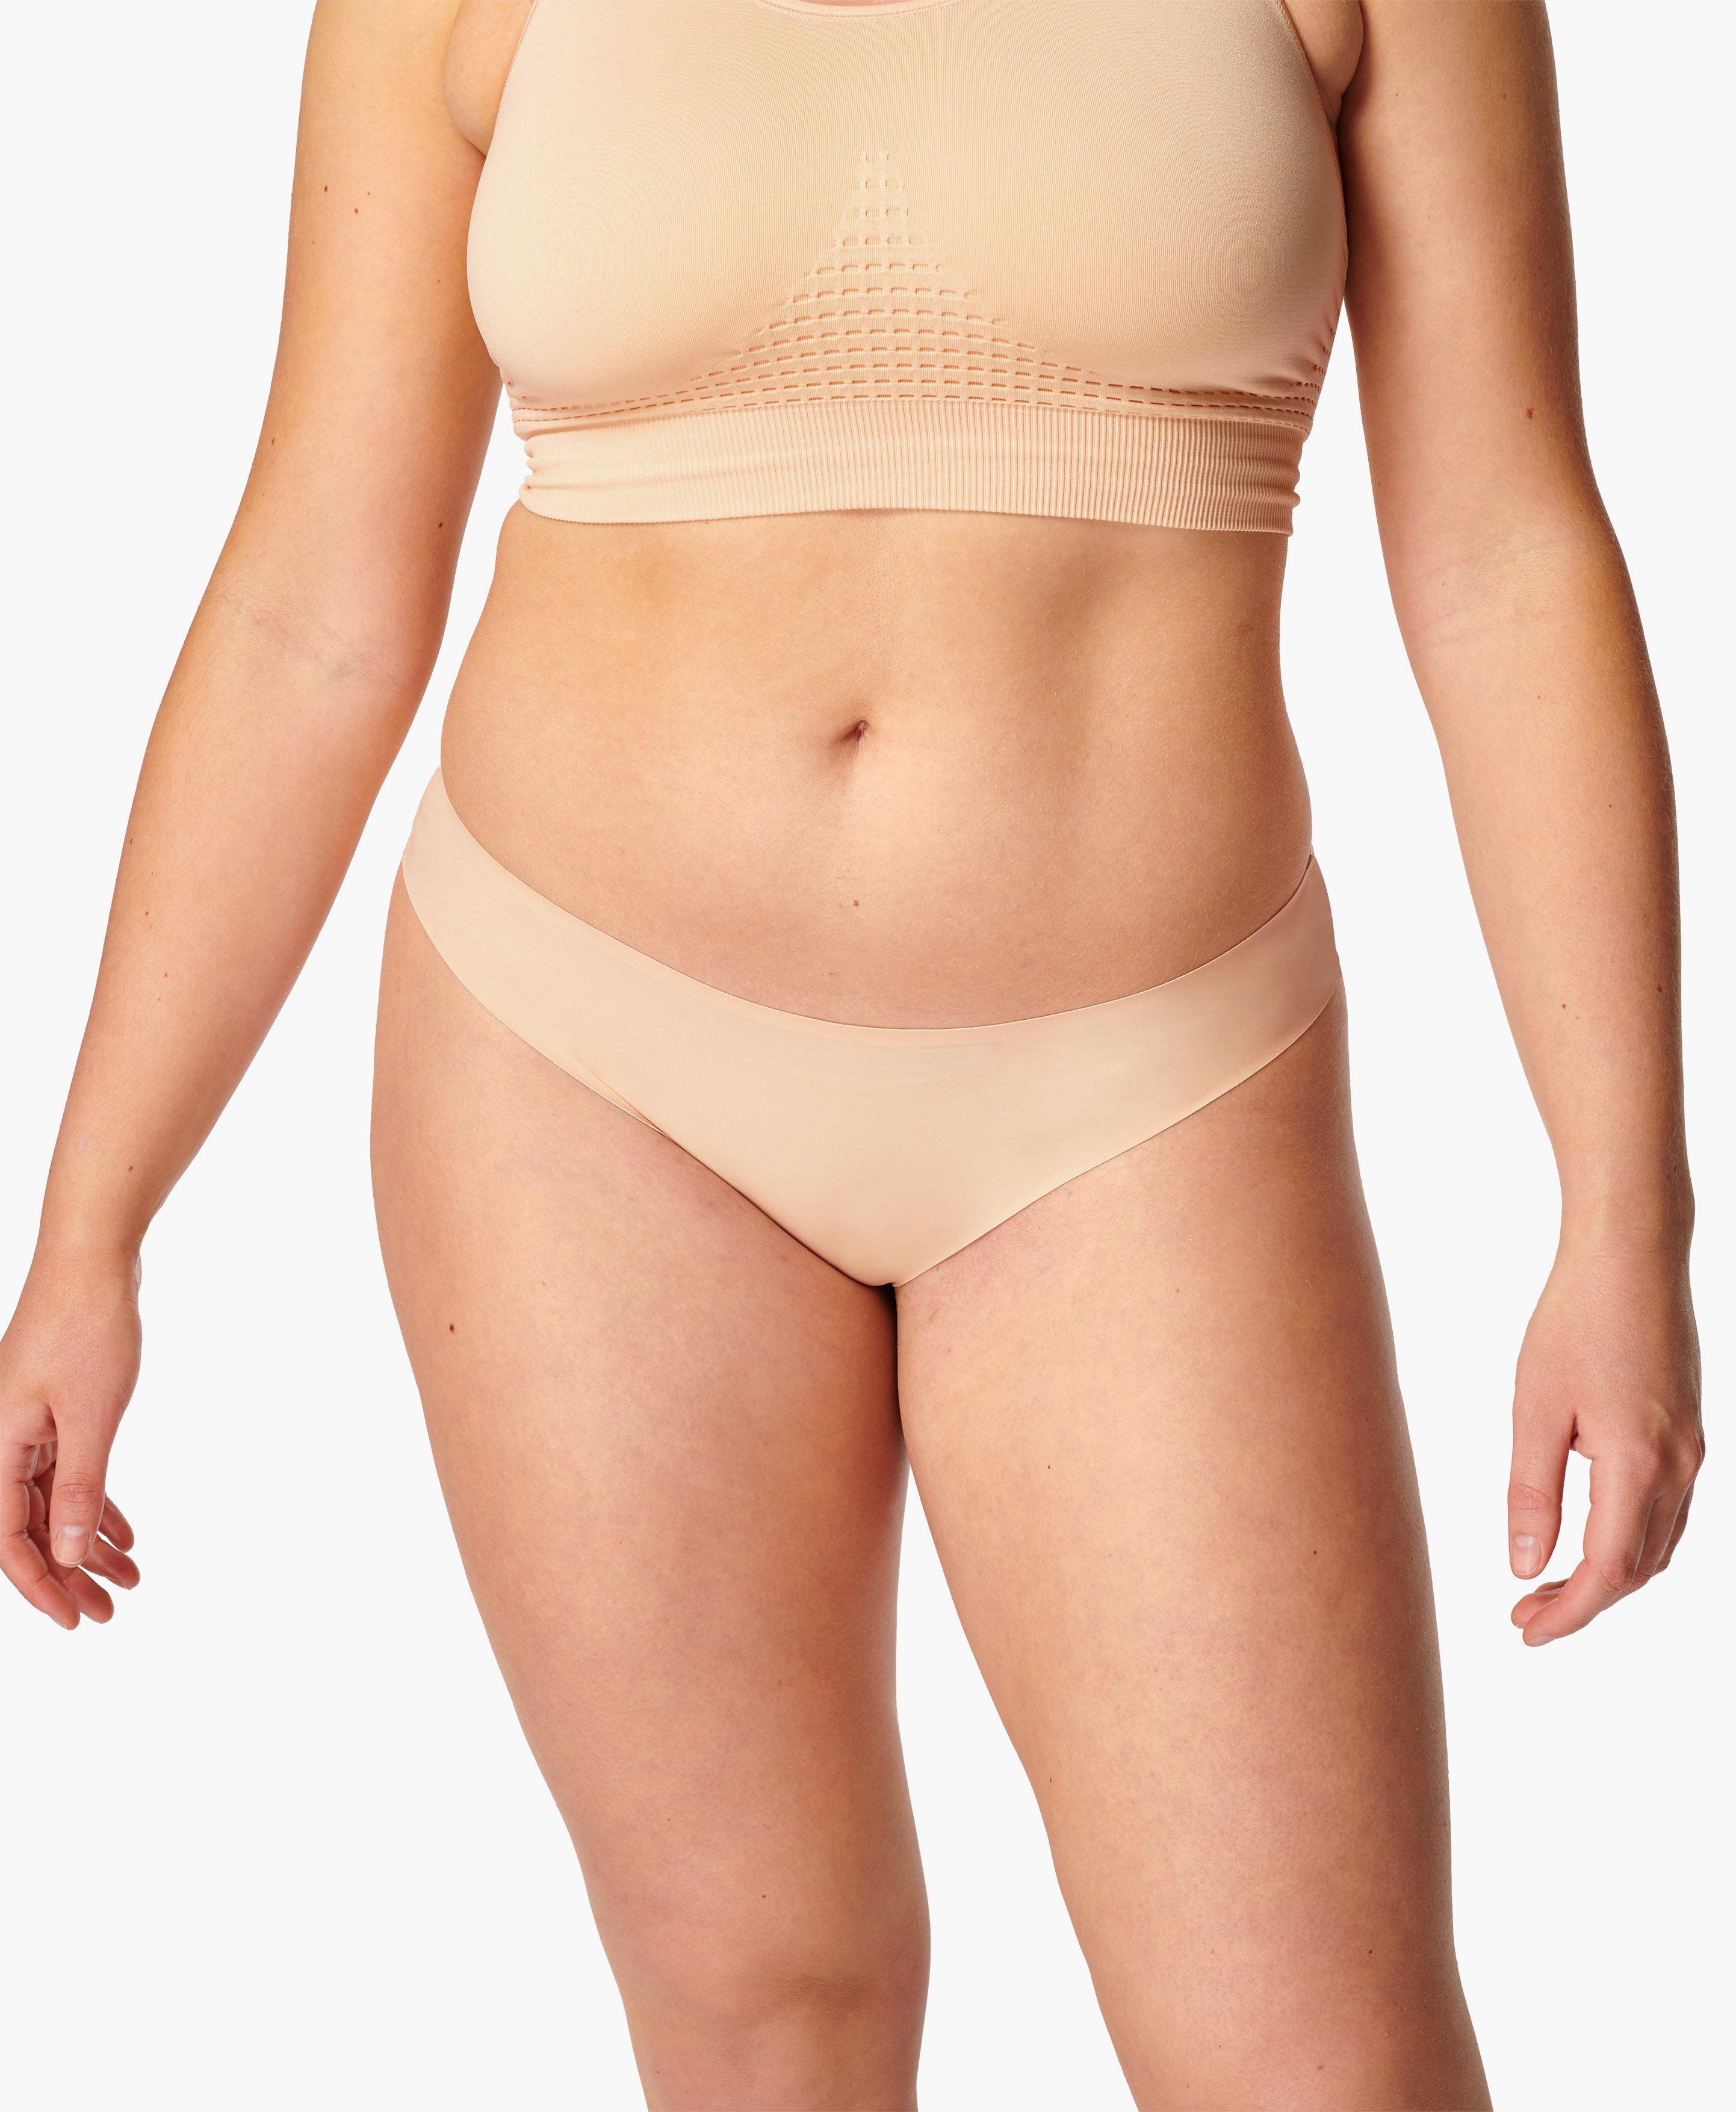 Barely There Thong- white, Women's Sports Pants & Underwear